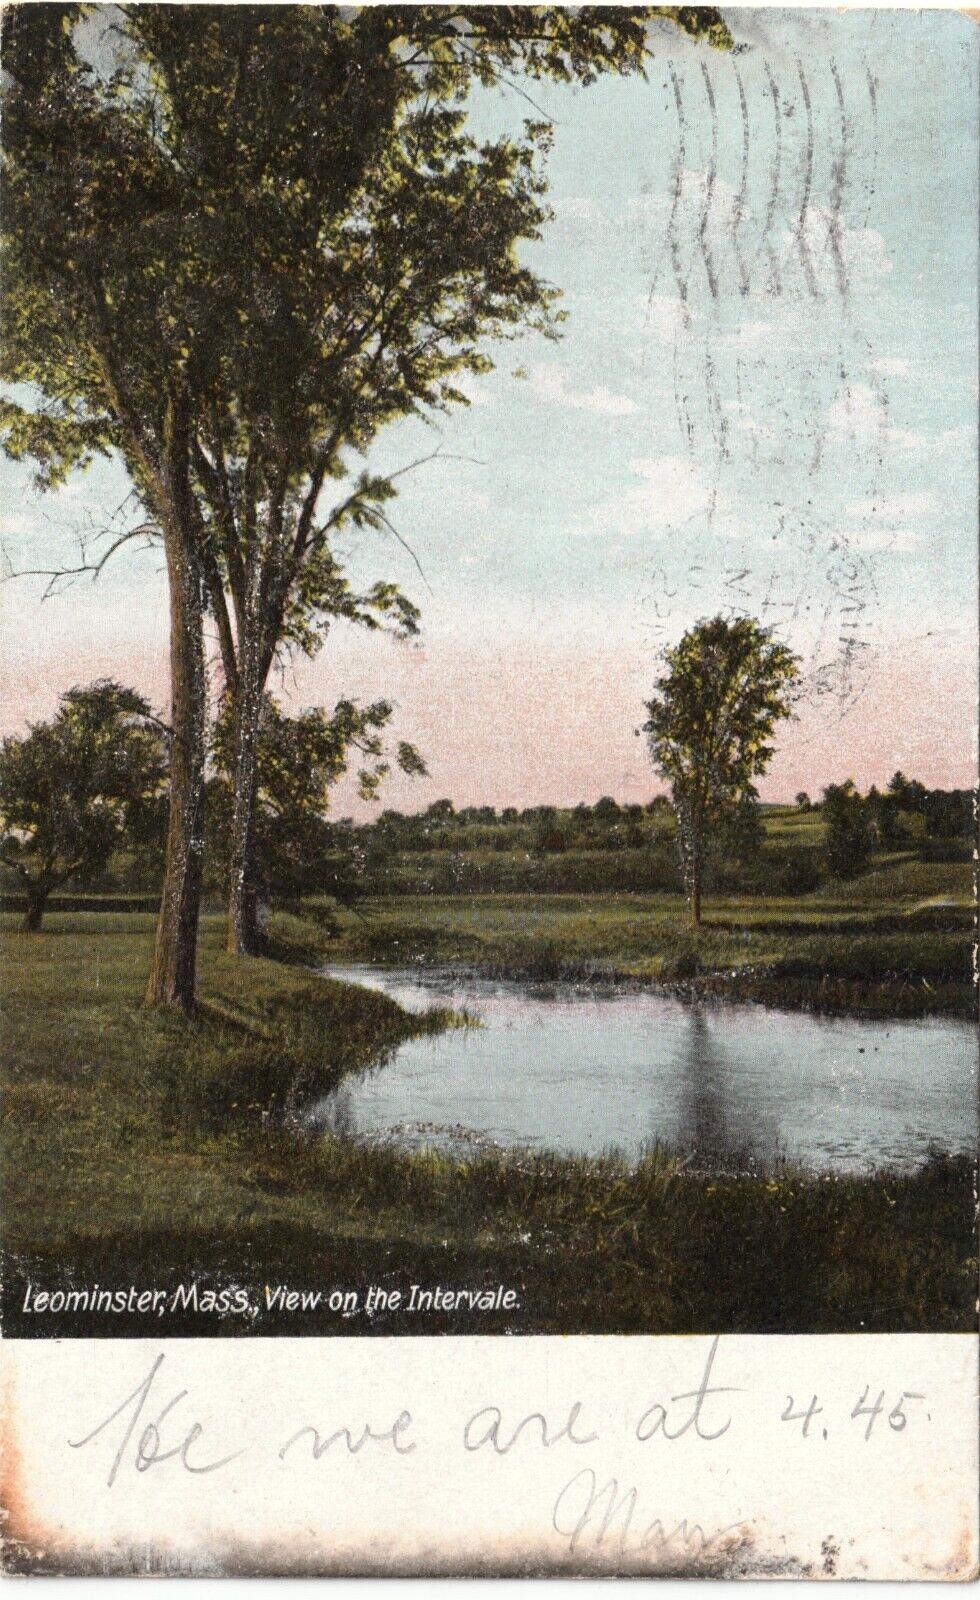 View on the Intervale in Leominster MA-1906 posted German glitter postcard